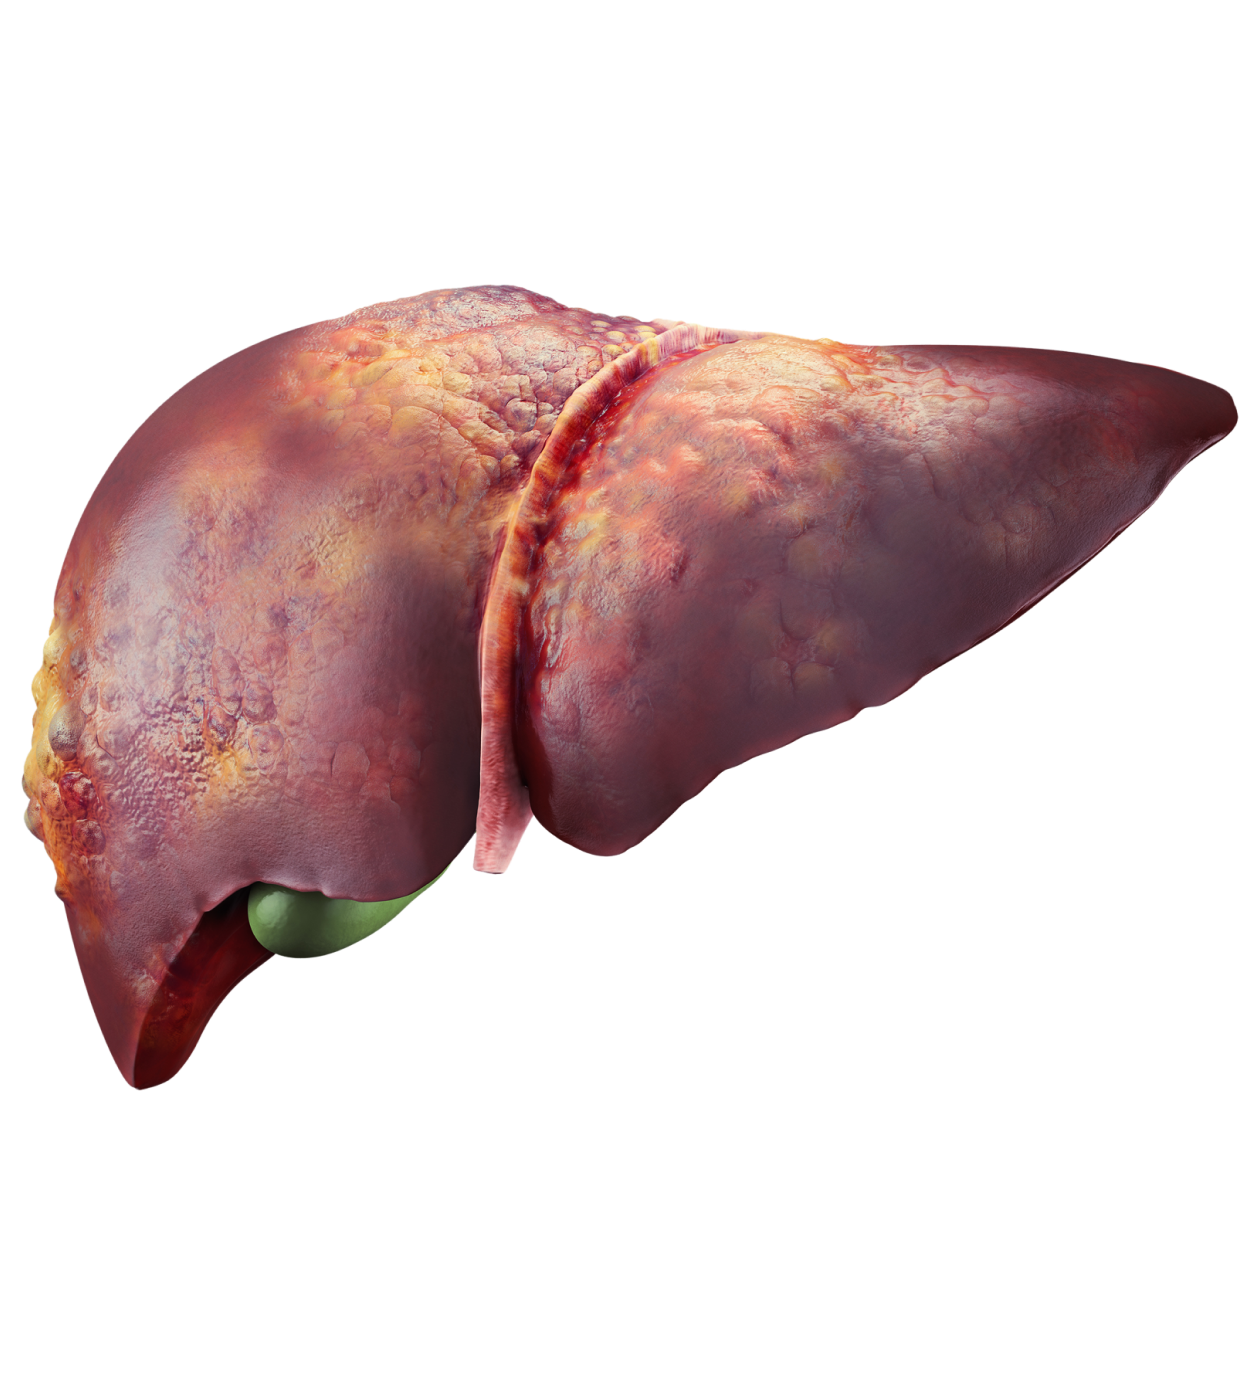 What is Liver Cancer